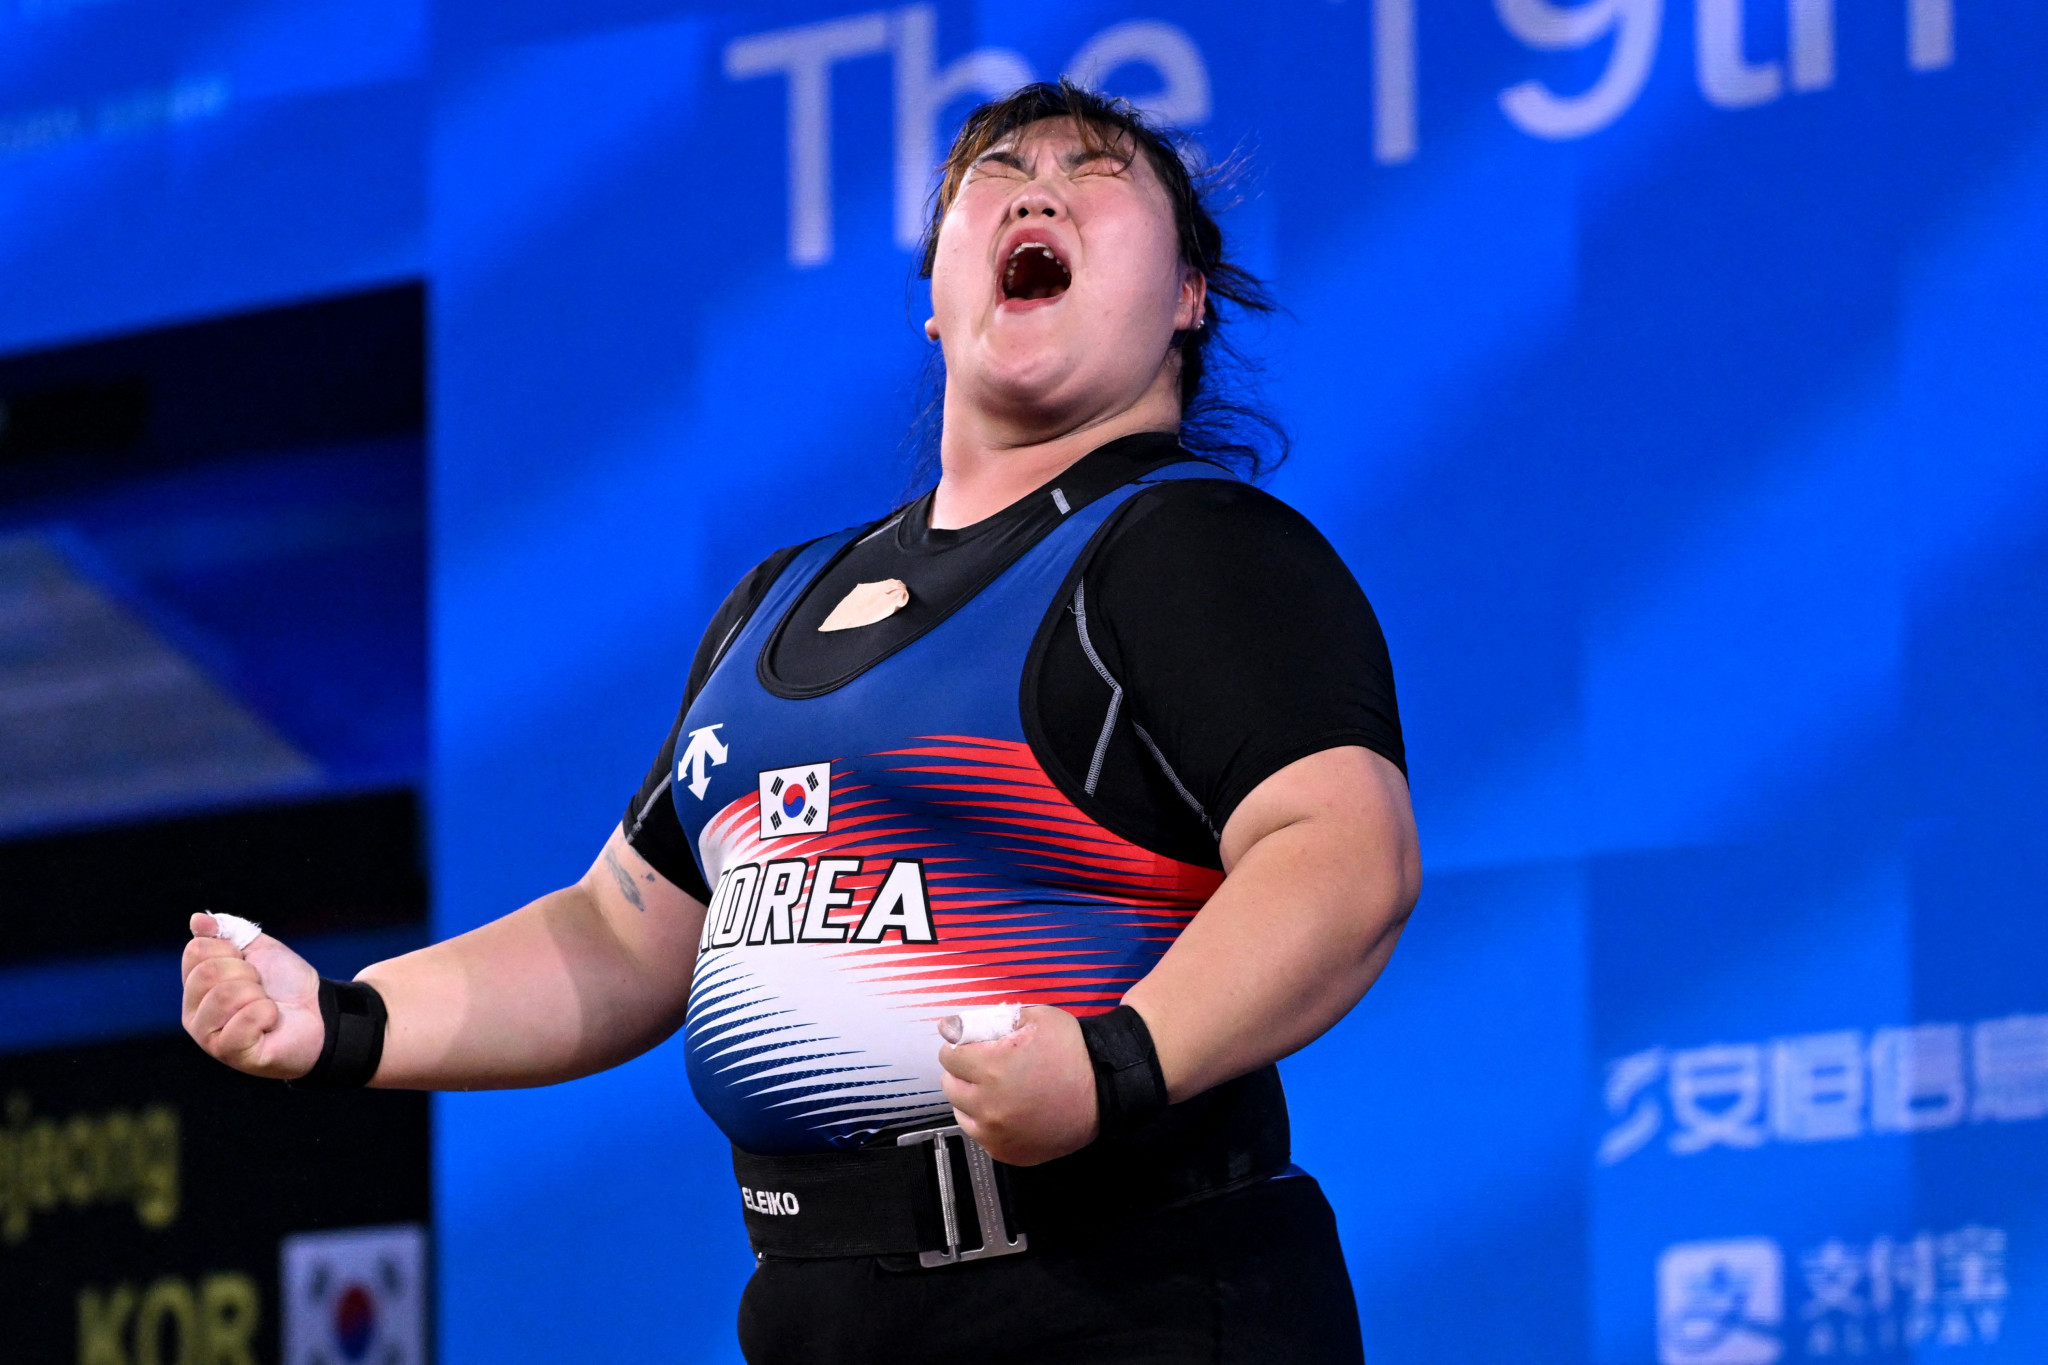 Park Hye-jeong of South Korea reacts while competing in the women's over-87kg weightlifting final ©Getty Images